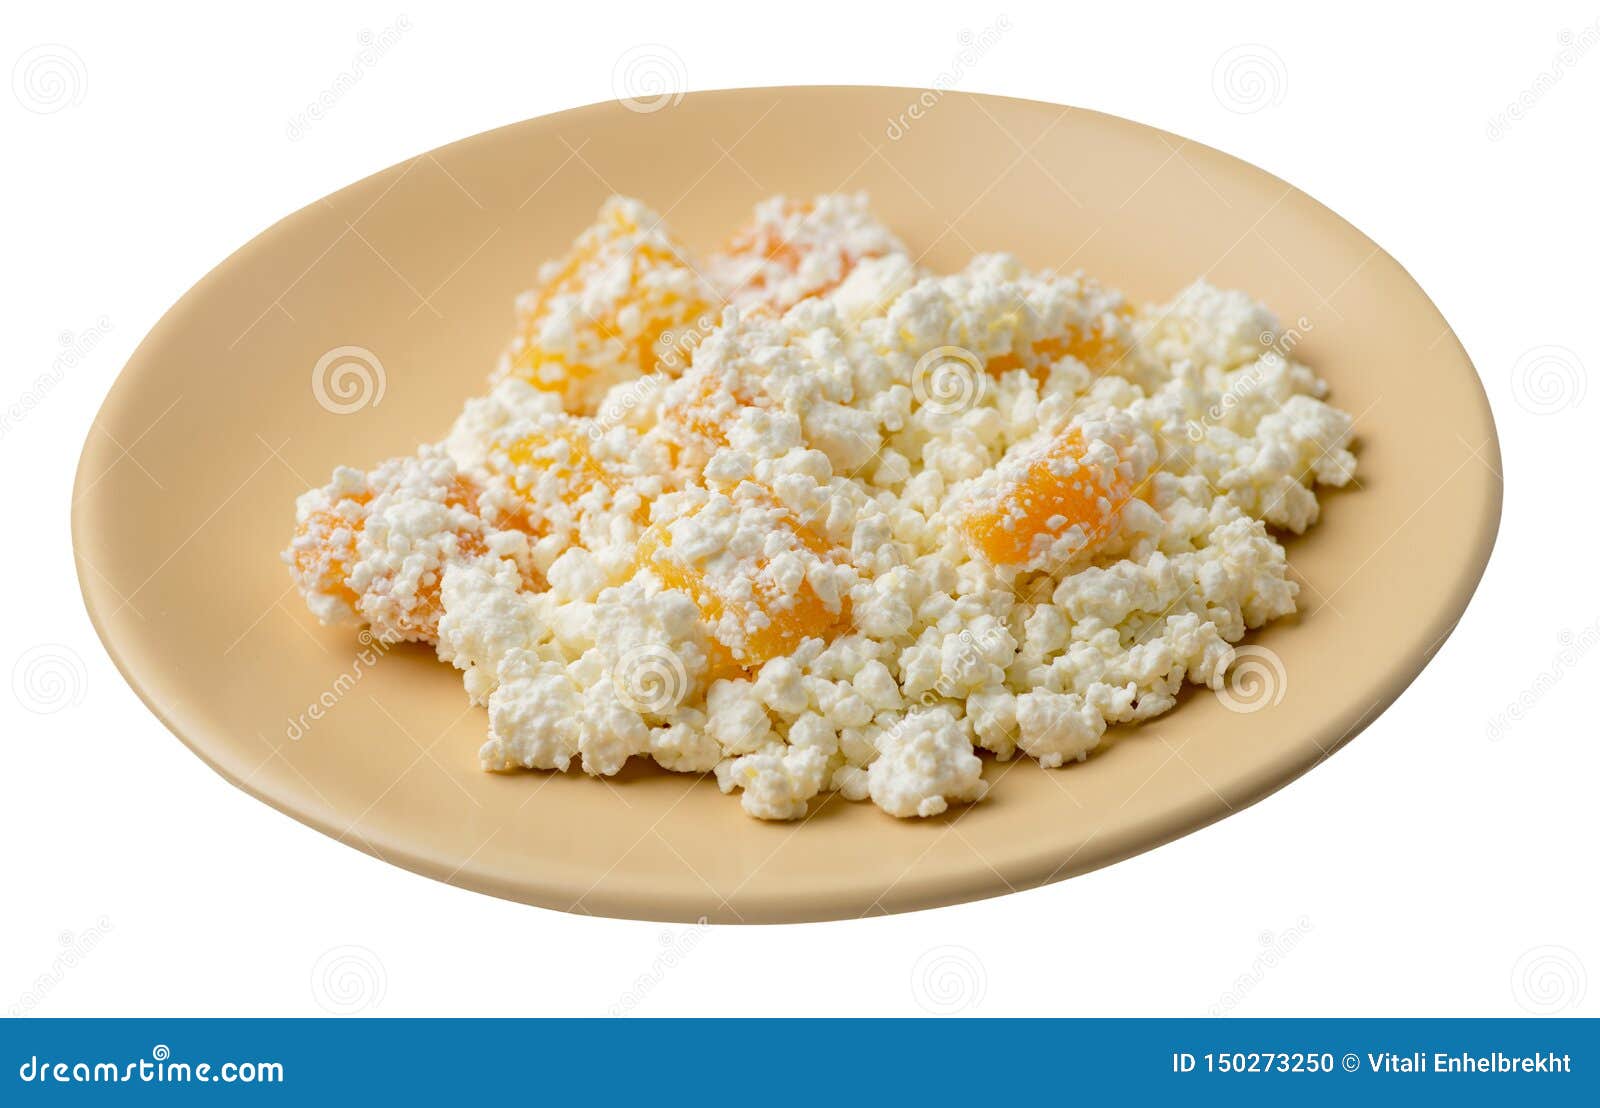 Cottage Cheese With Peaches On A Plate Isolated On White